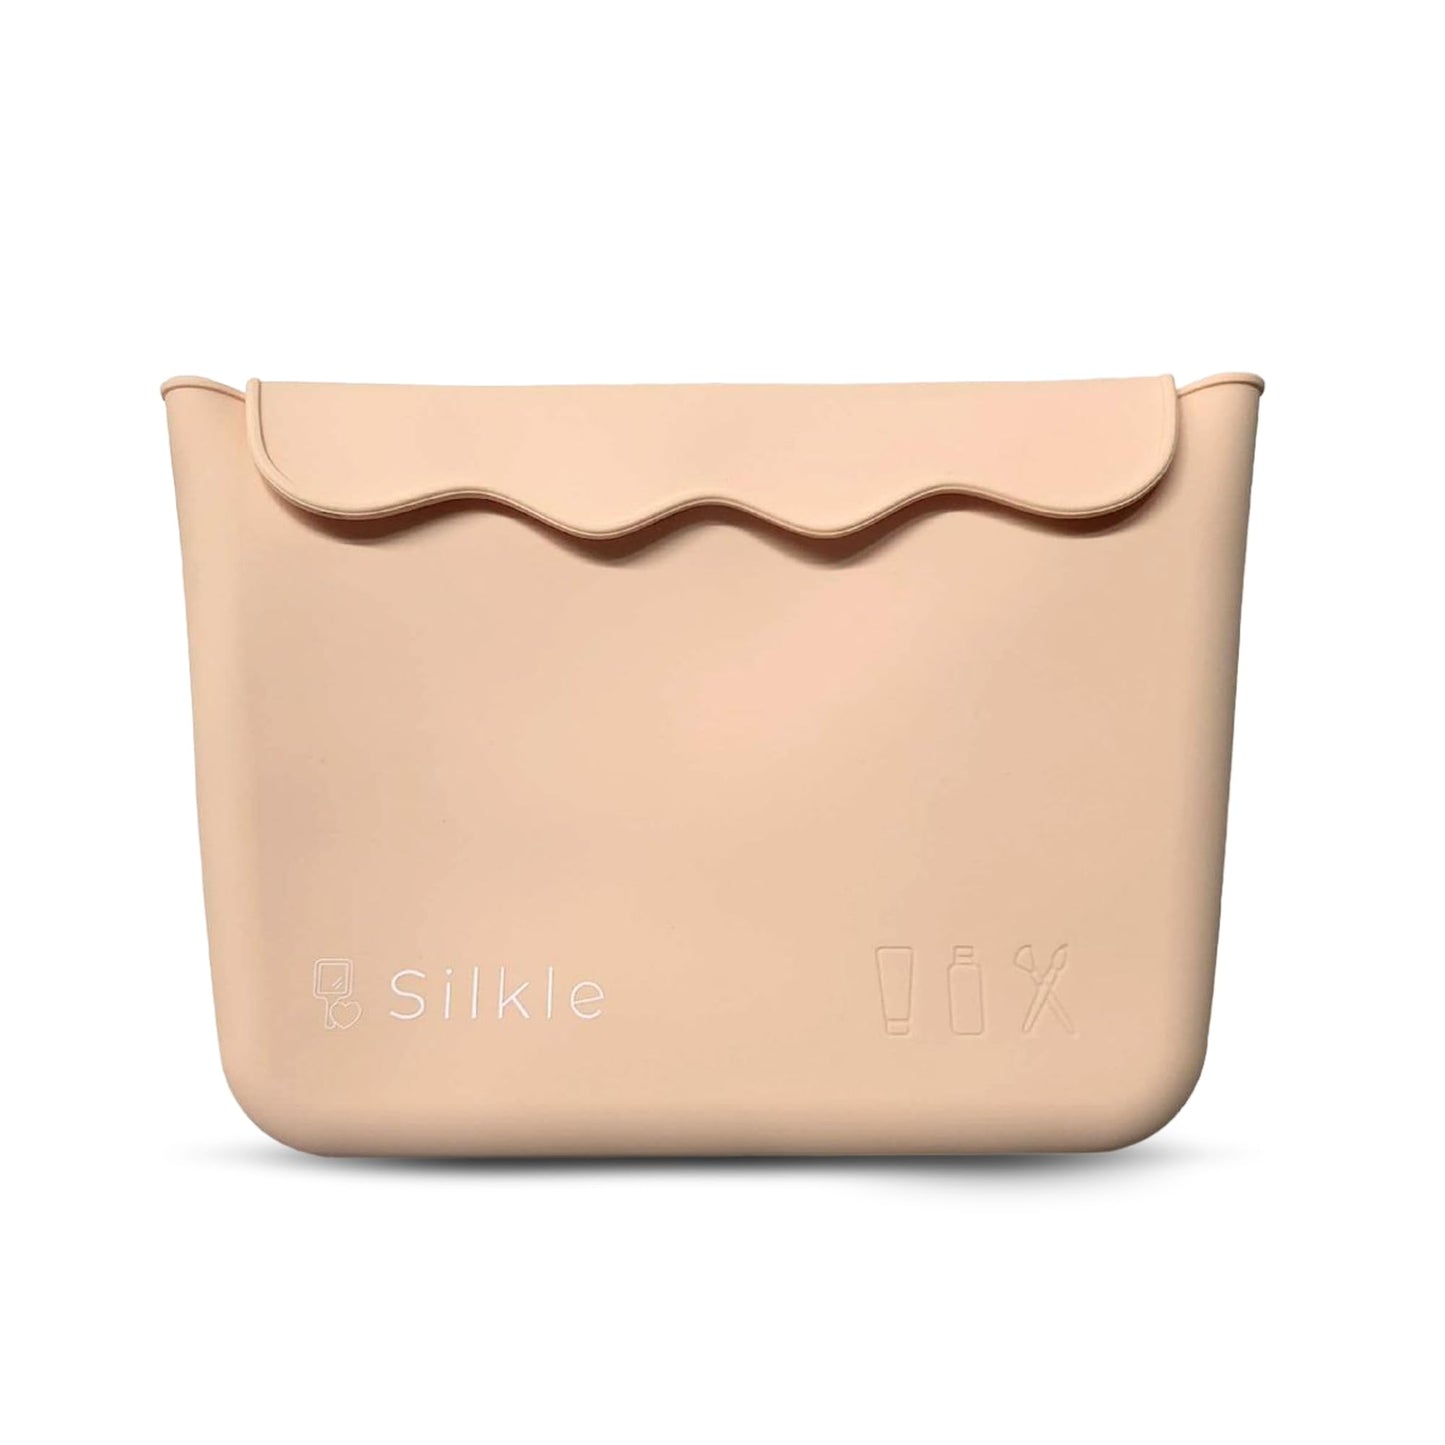 SILKLE Silicone Makeup Bag - Versatile Makeup Organizer with Magnets and Wavy Design, Travel Toiletry Bag and Makeup Brush Holder - Compact and Stylish Cosmetic Bag for Daily Use - Khaki